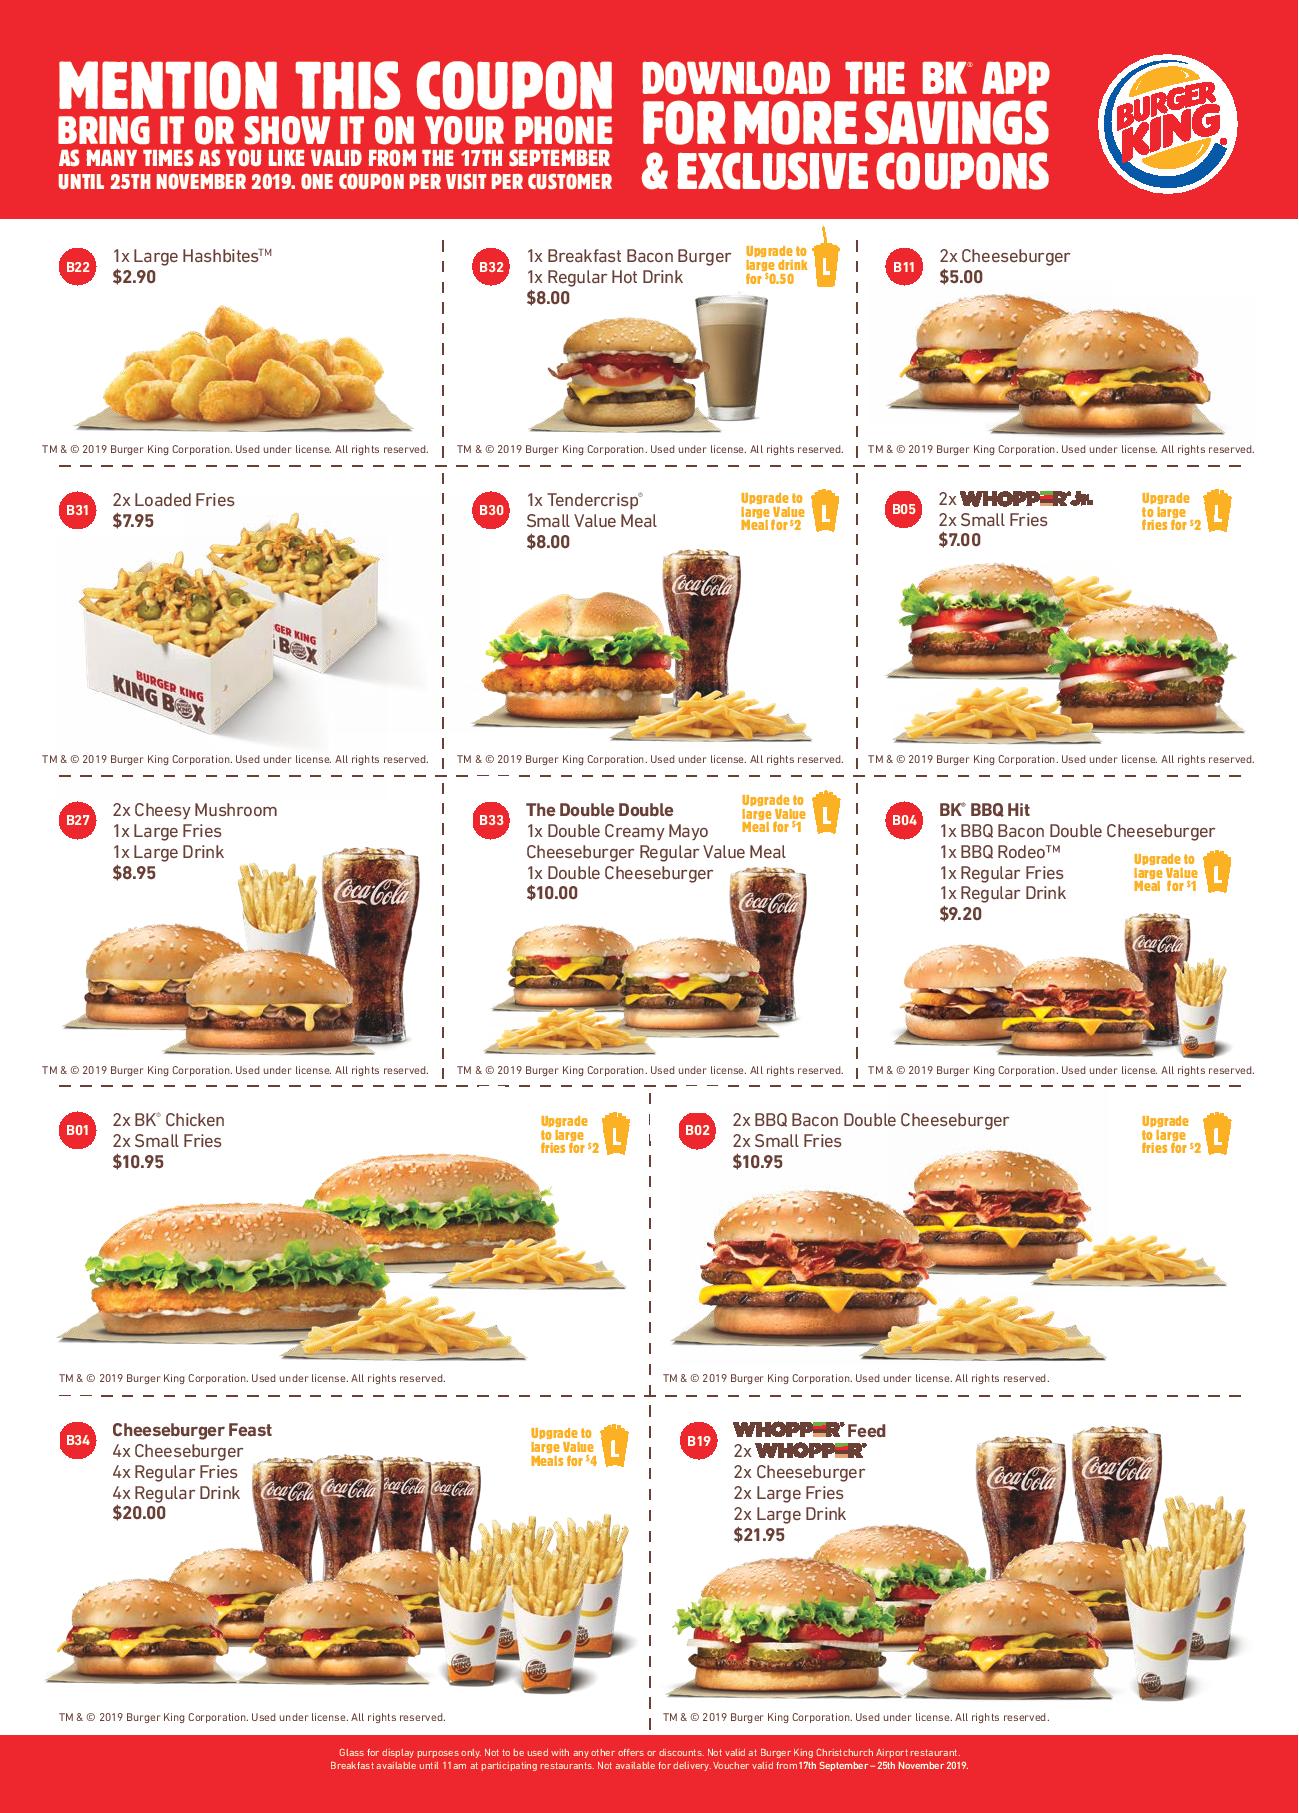 deal-burger-king-coupons-valid-until-13-january-2020-latest-bk